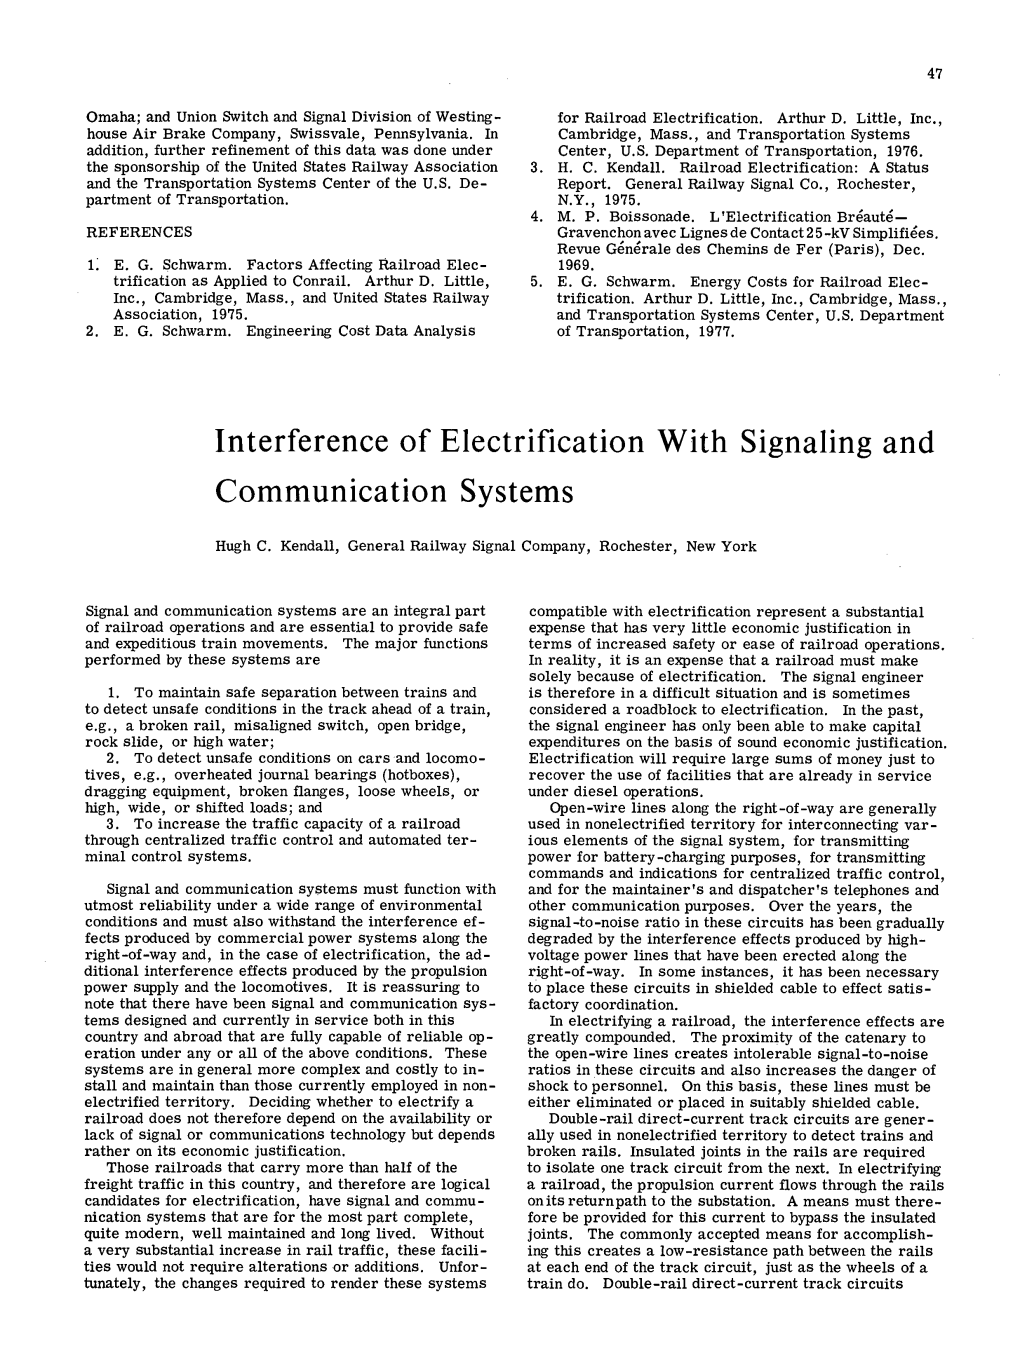 Interference of Electrification with Signaling and Communication Systems